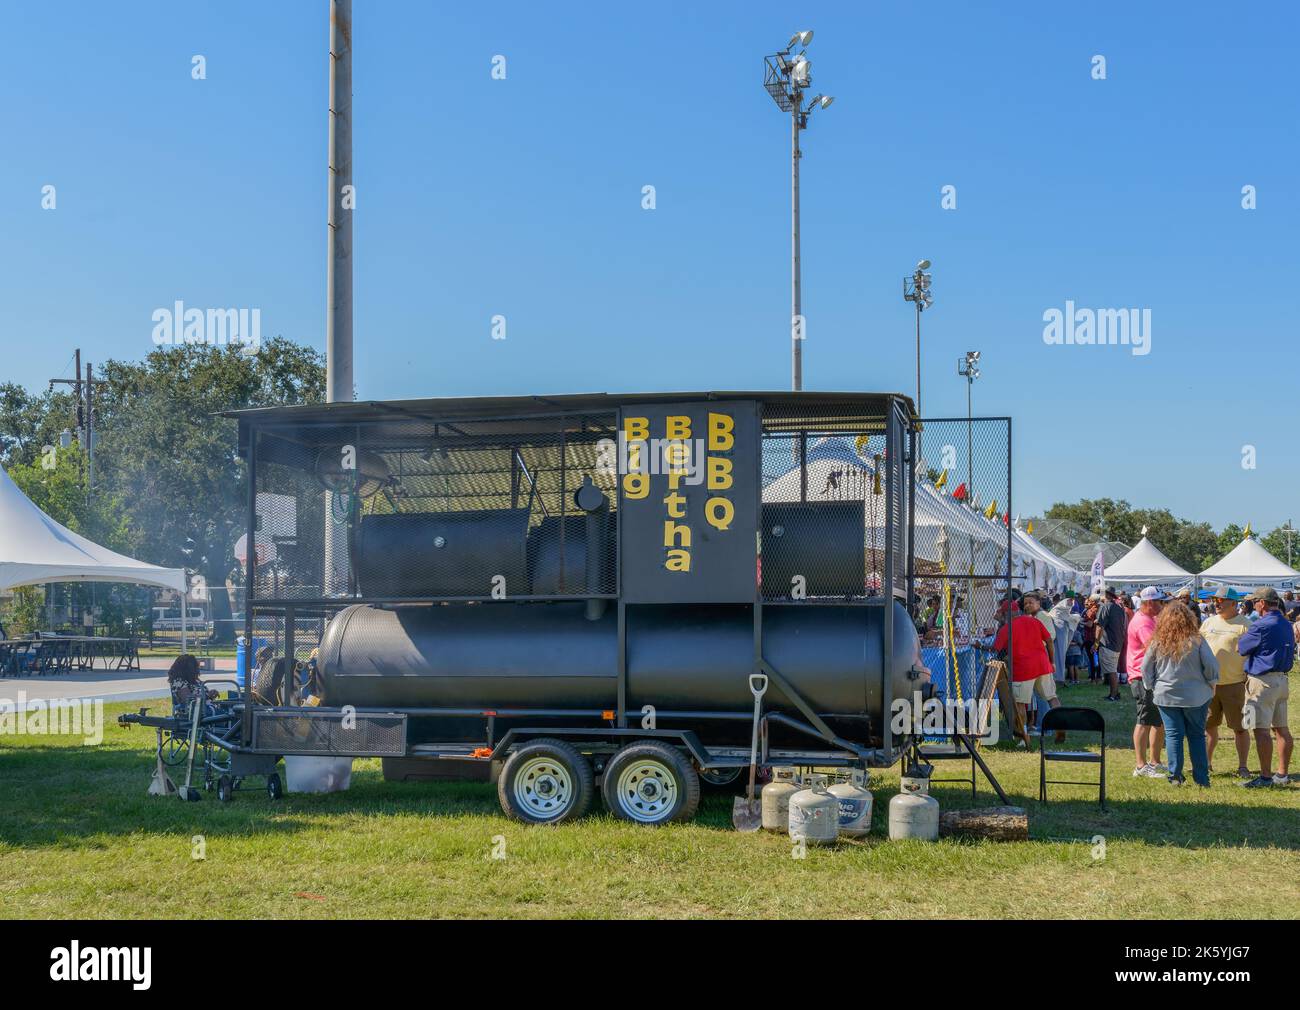 NEW ORLEANS, LA, USA - OCTOBER 9, 2022: Large metal smoker on a trailer for Big Bertha BBQ at Gentillyfest in the Pontchartrain Park neighborhood Stock Photo